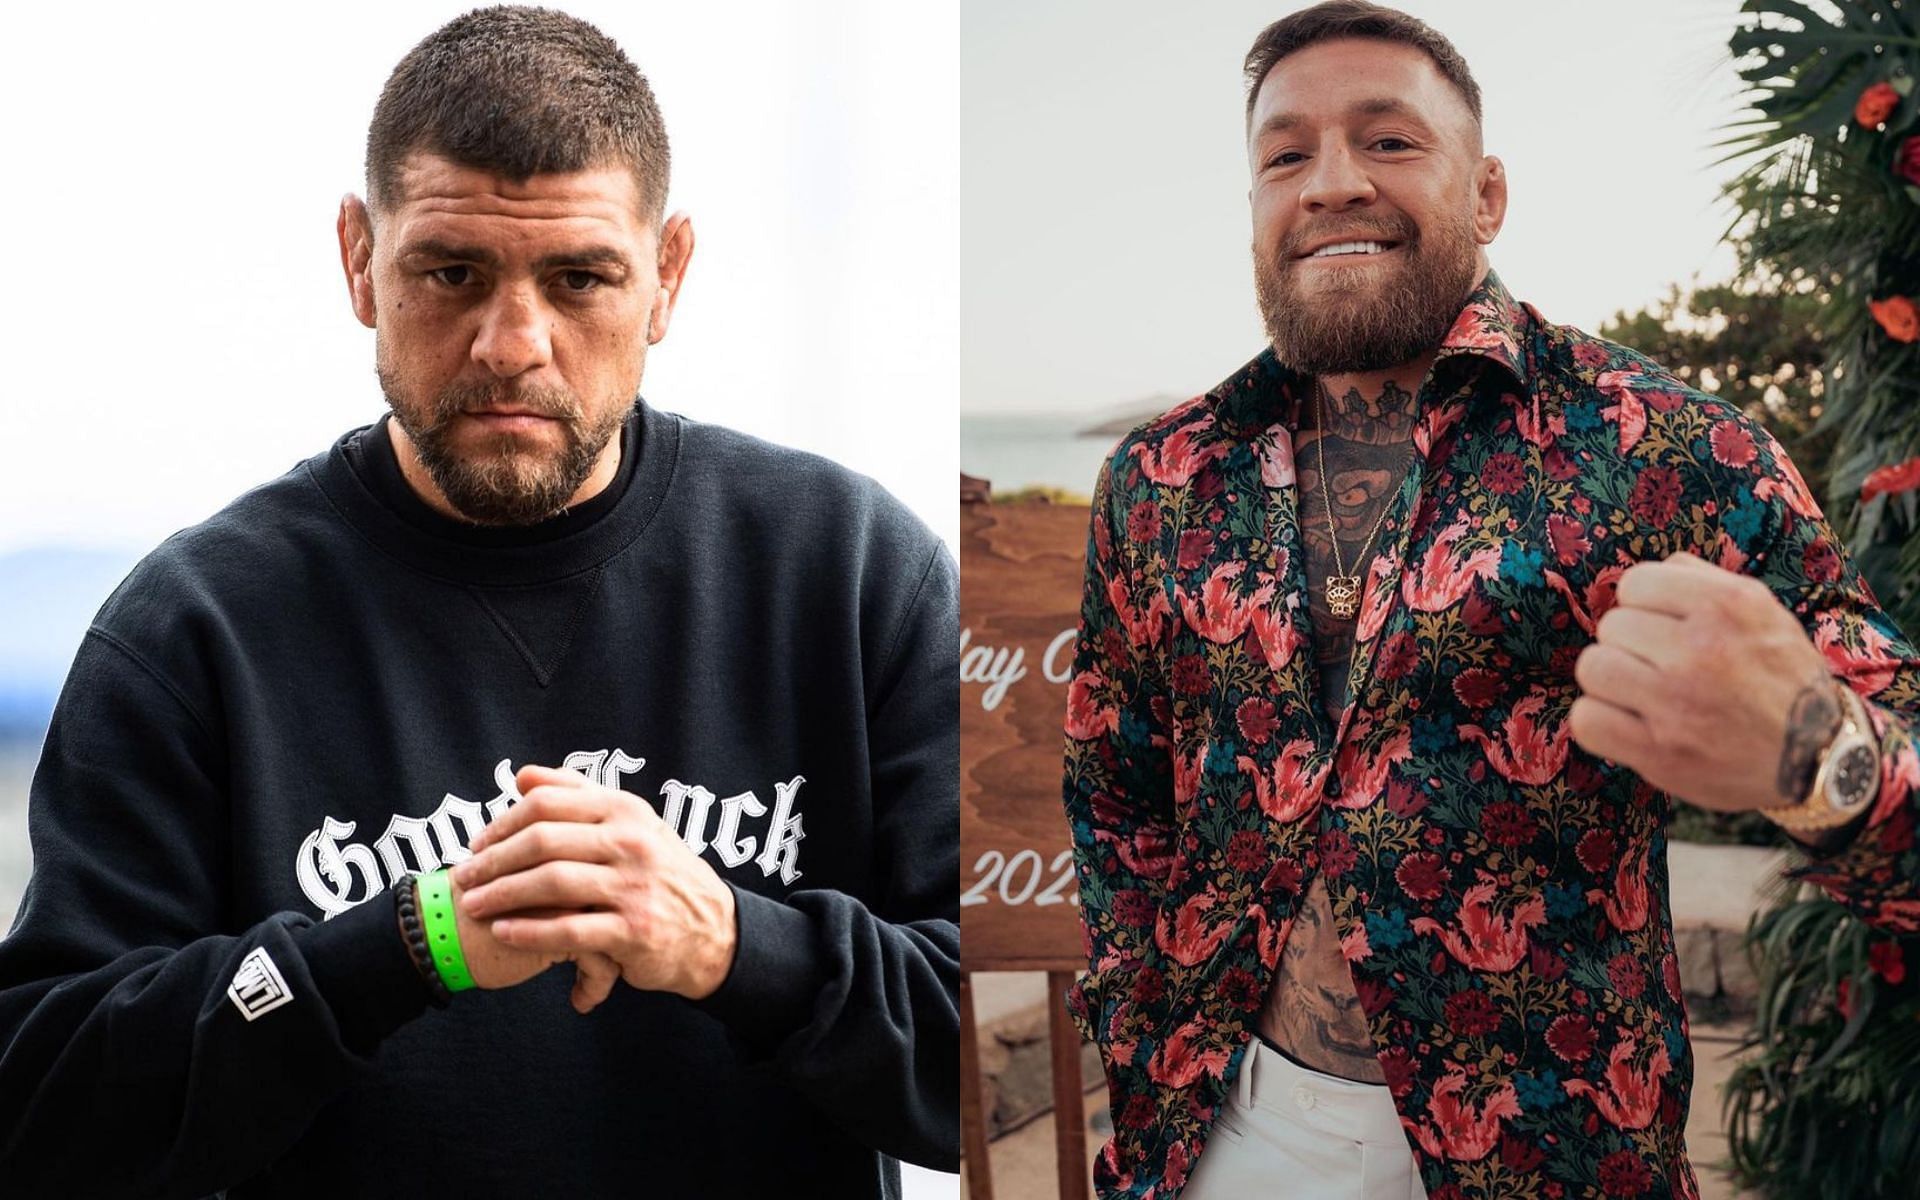 Nick Diaz and Conor McGregor (left and right; images courtesy of @nickdiaz209 and @thenotoriousmma Instagram)